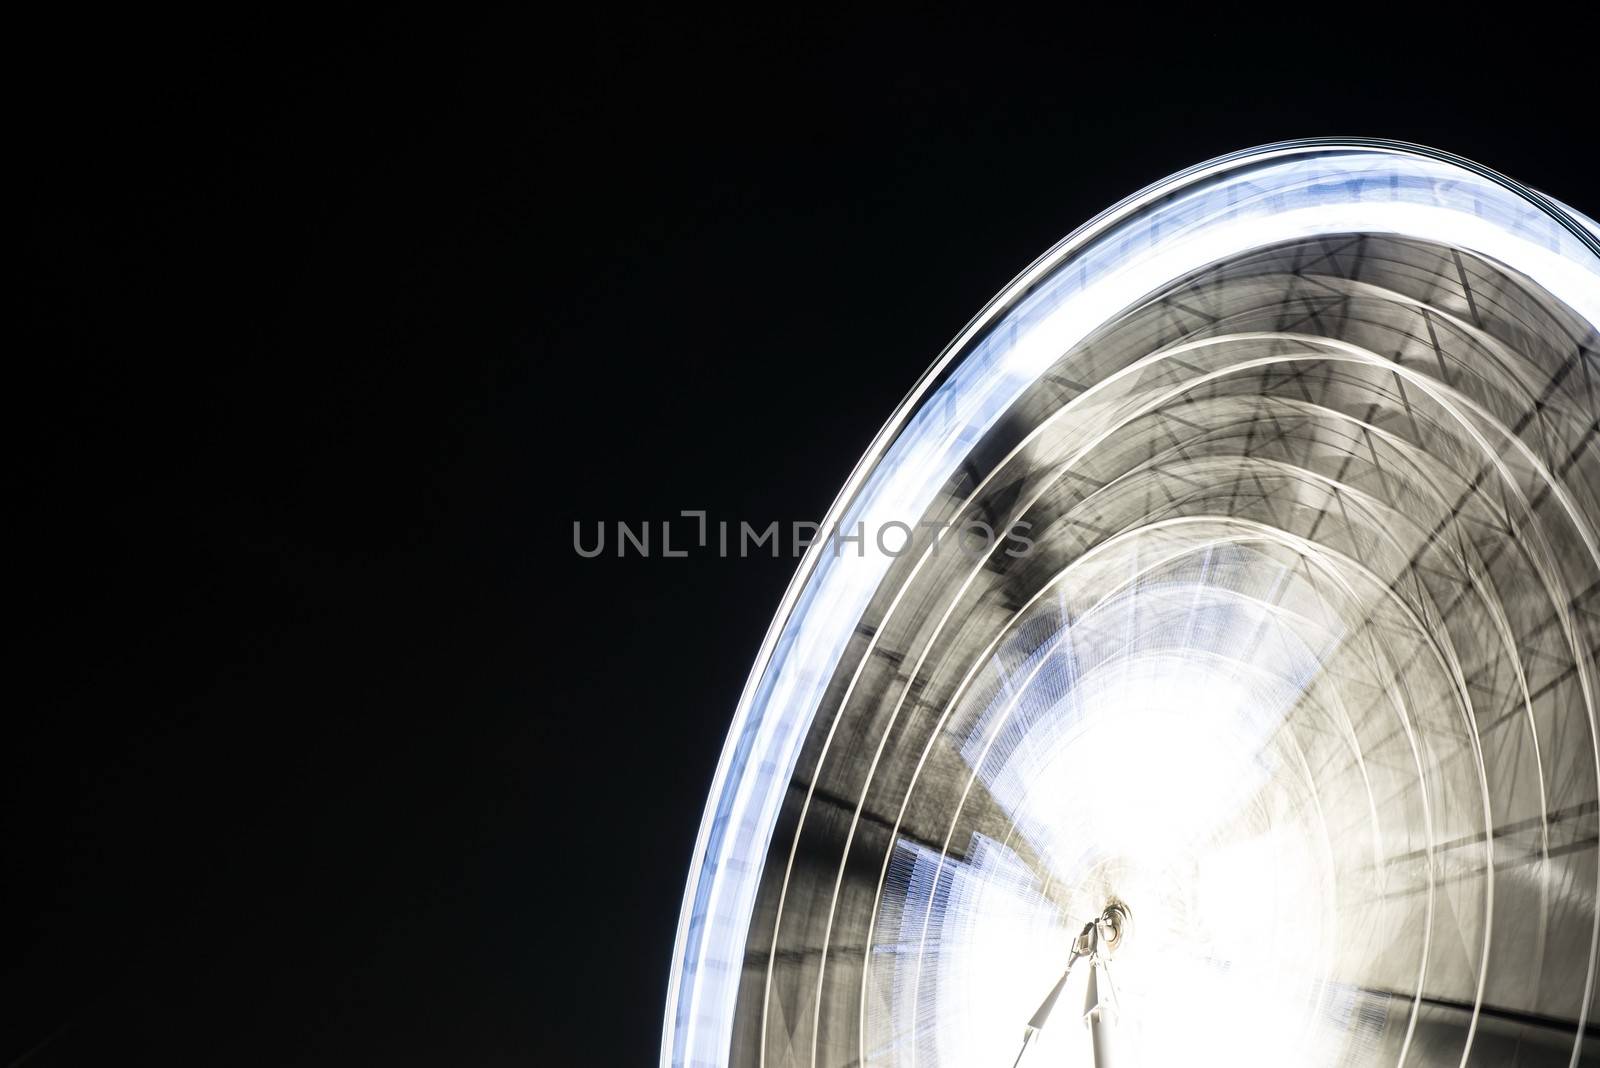 Fairy wheel in an amusement park during night time by sasilsolutions